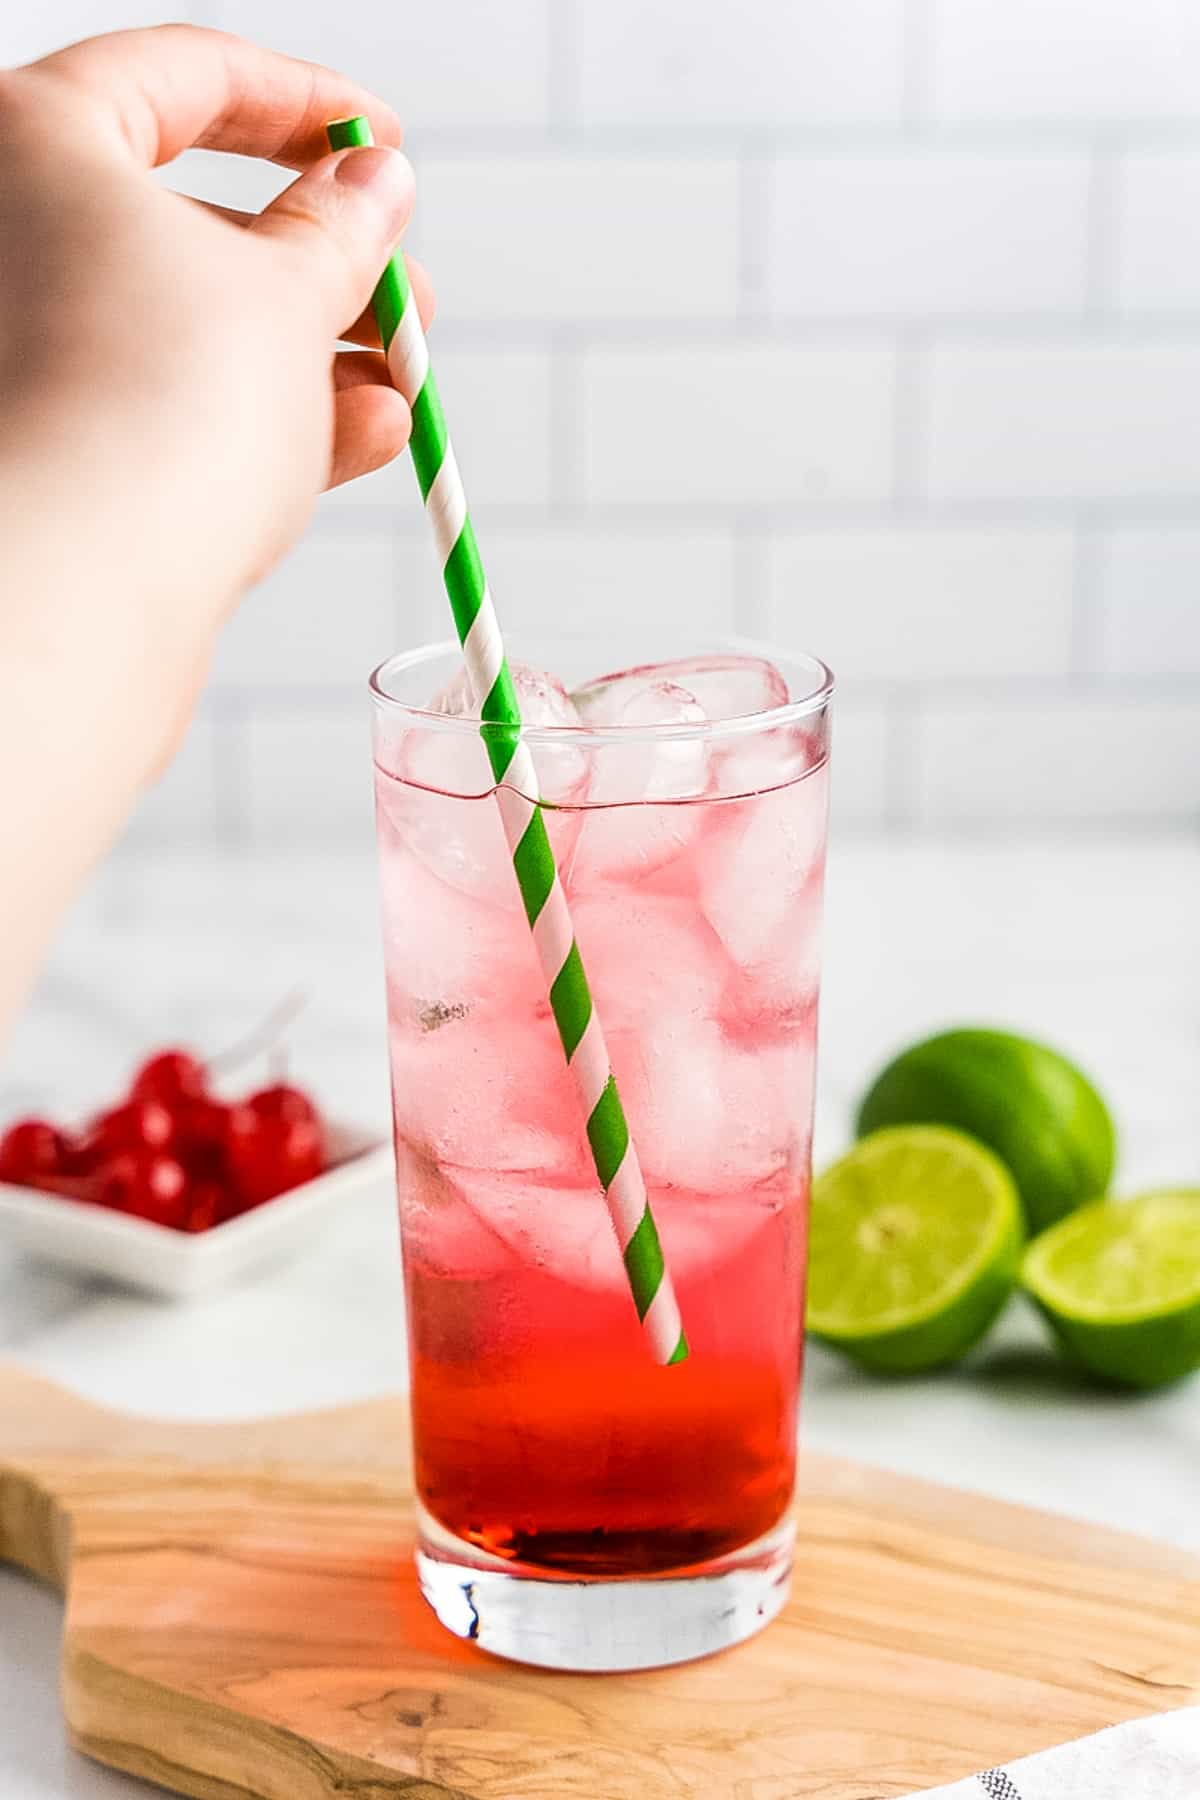 Stirring cocktail with paper straw